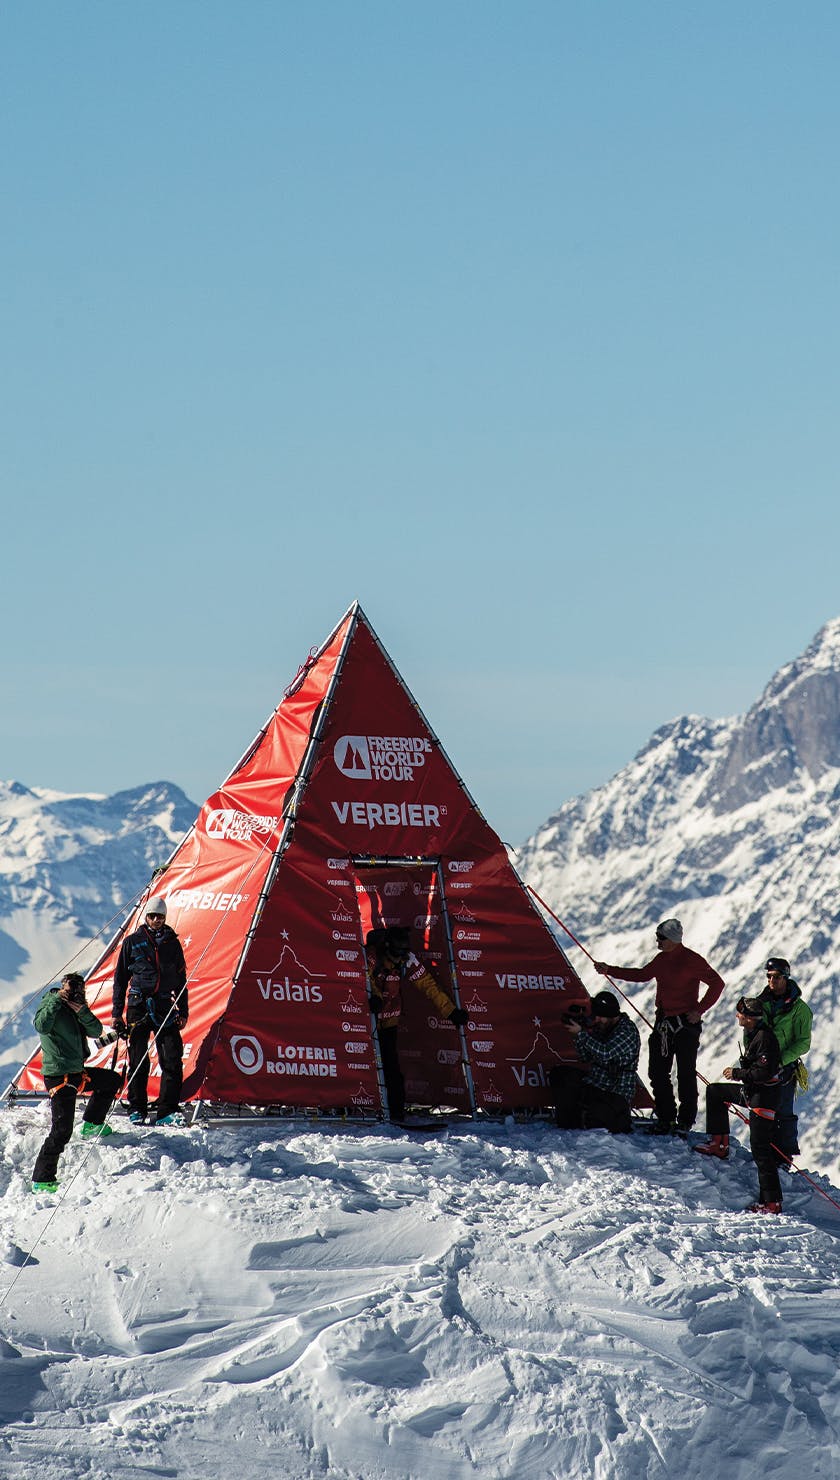 Verbier, Switzerland, the final stop of the Freeride World Tour. 